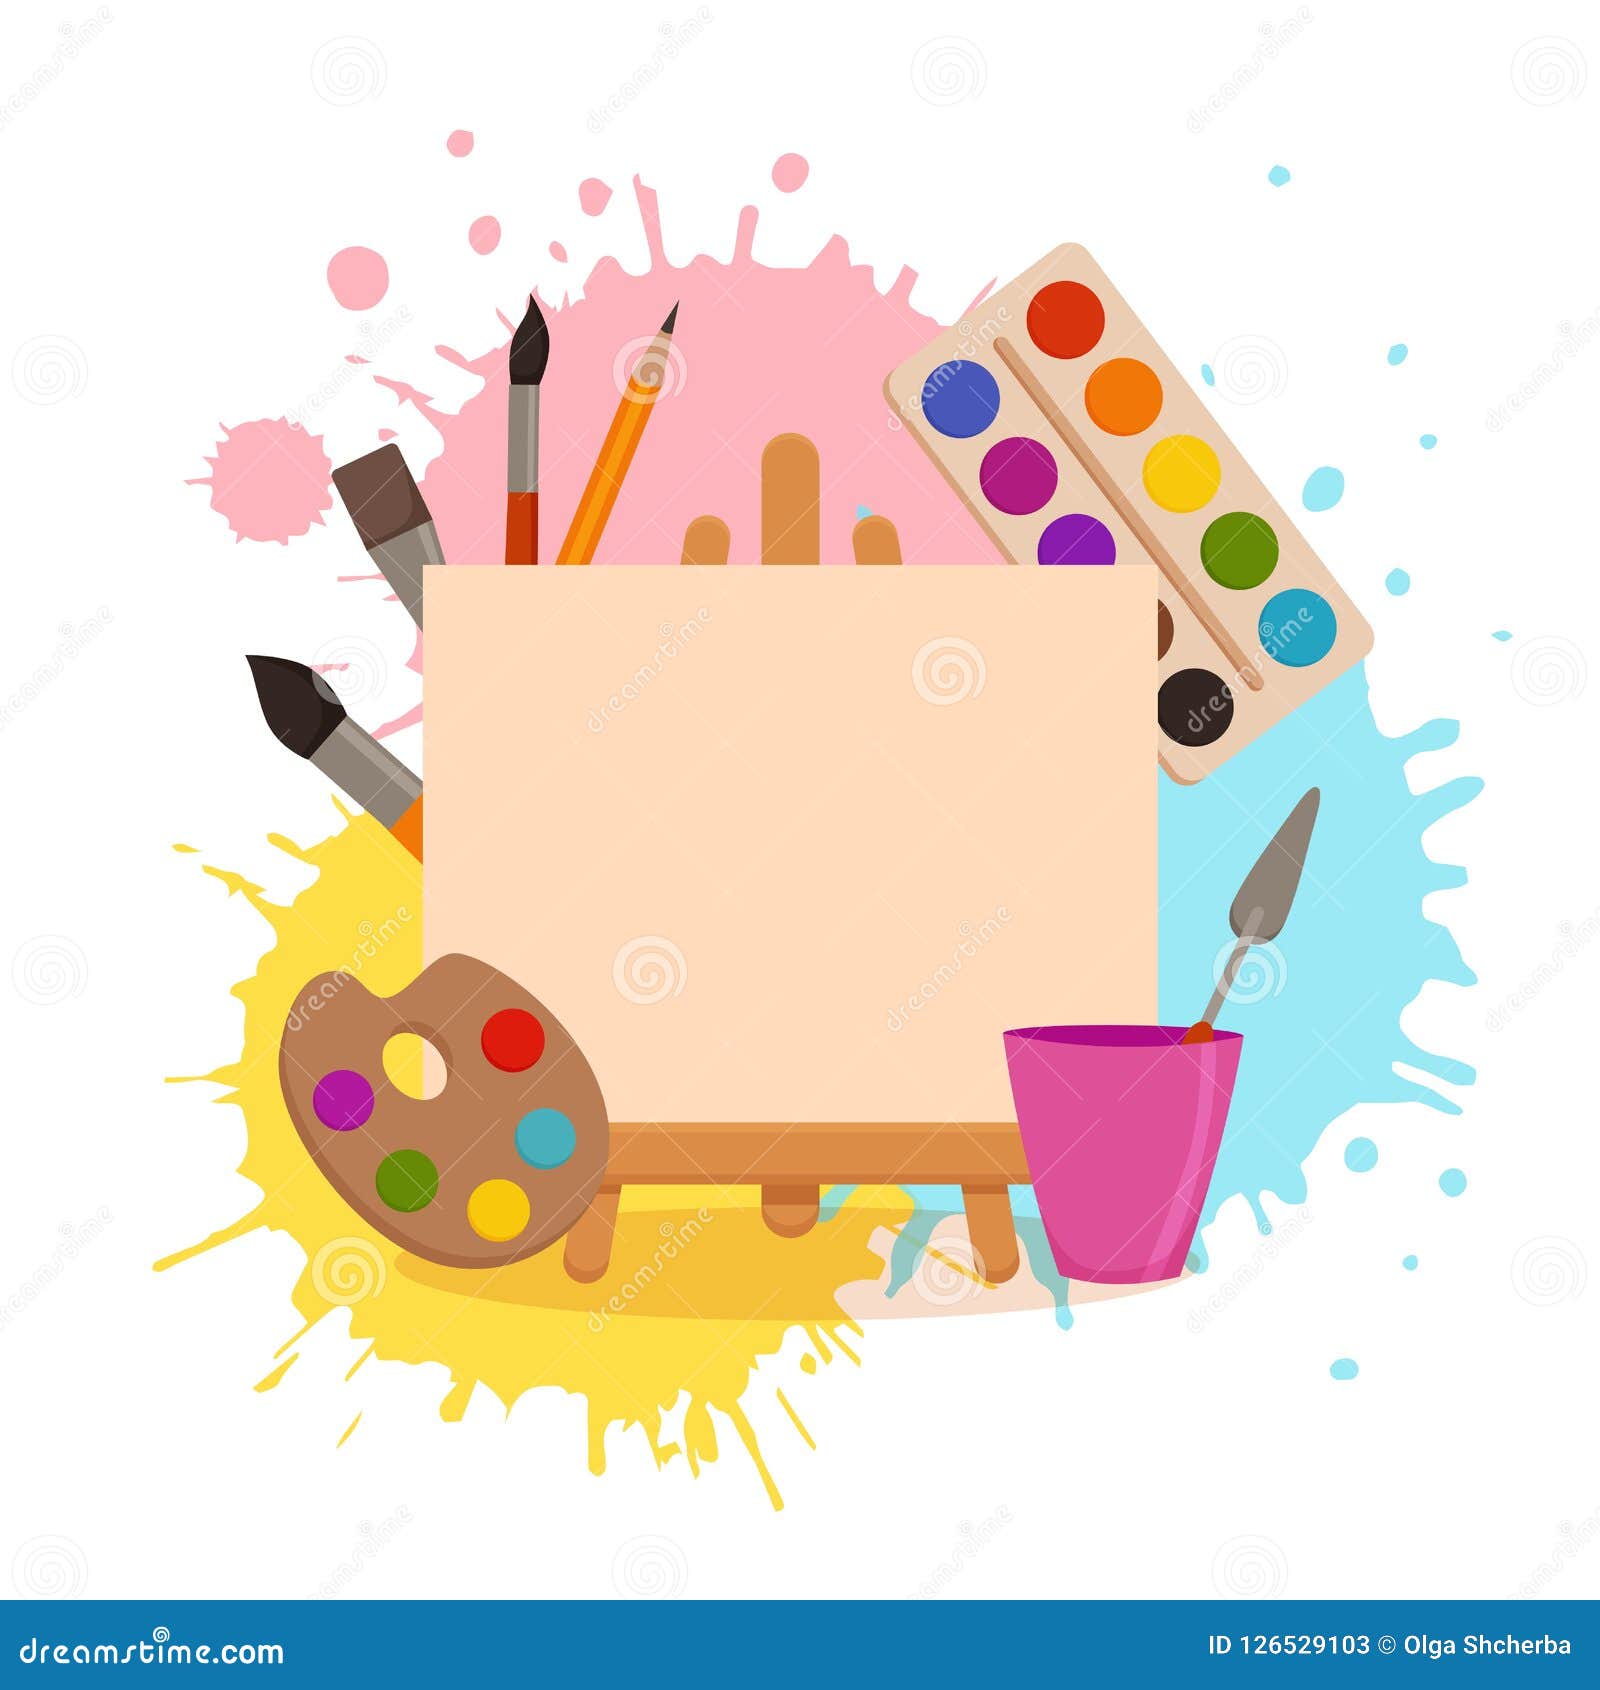 Premium Vector  Set of artists palette and brush vector illustration of  artists drawing supplies in cartoon child